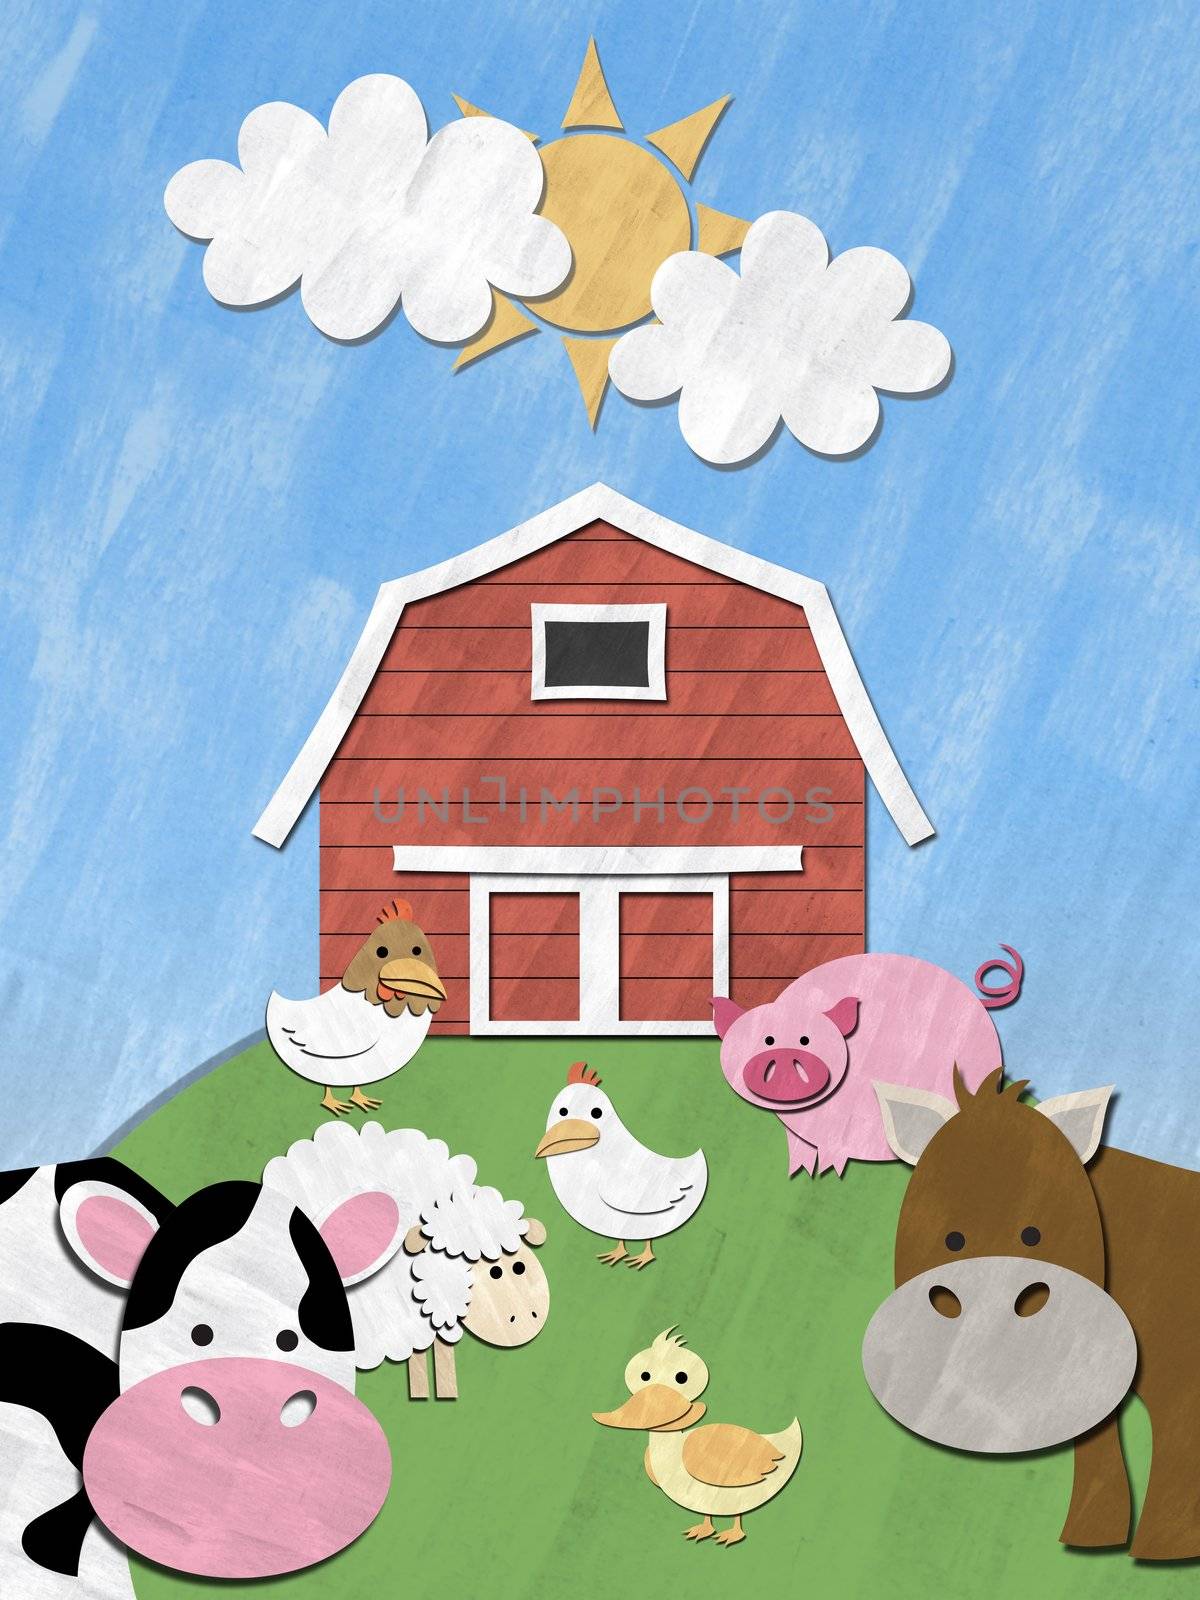 Farm animals stand in front of barnyard on sunny day